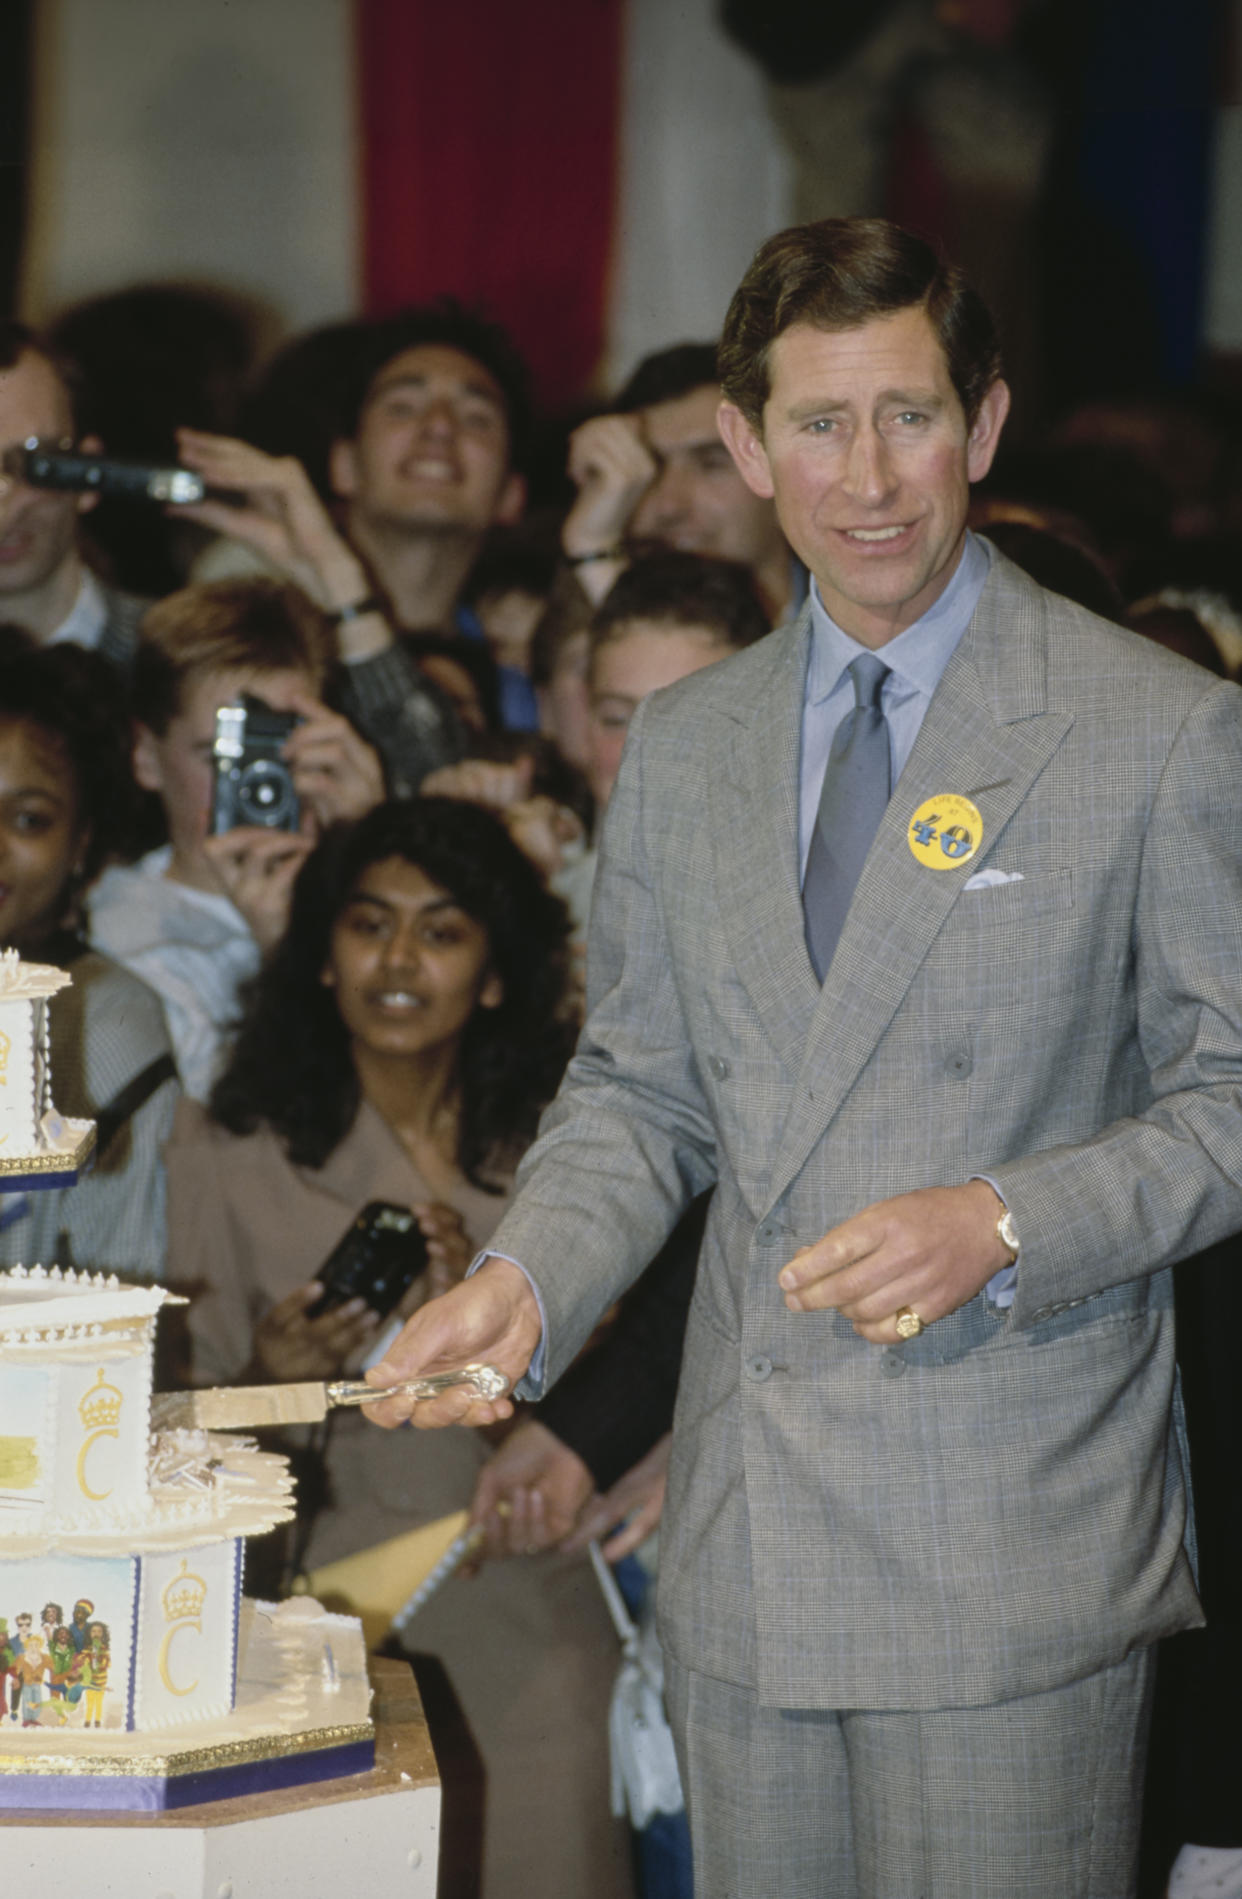 Prince Charles cuts his tiered birthday cake at his 40th Birthday party during the launch of his Princes Youth Business Trust in Birmingham, England, 11th November 1988. (Photo by Tim Graham Photo Library via Getty Images)